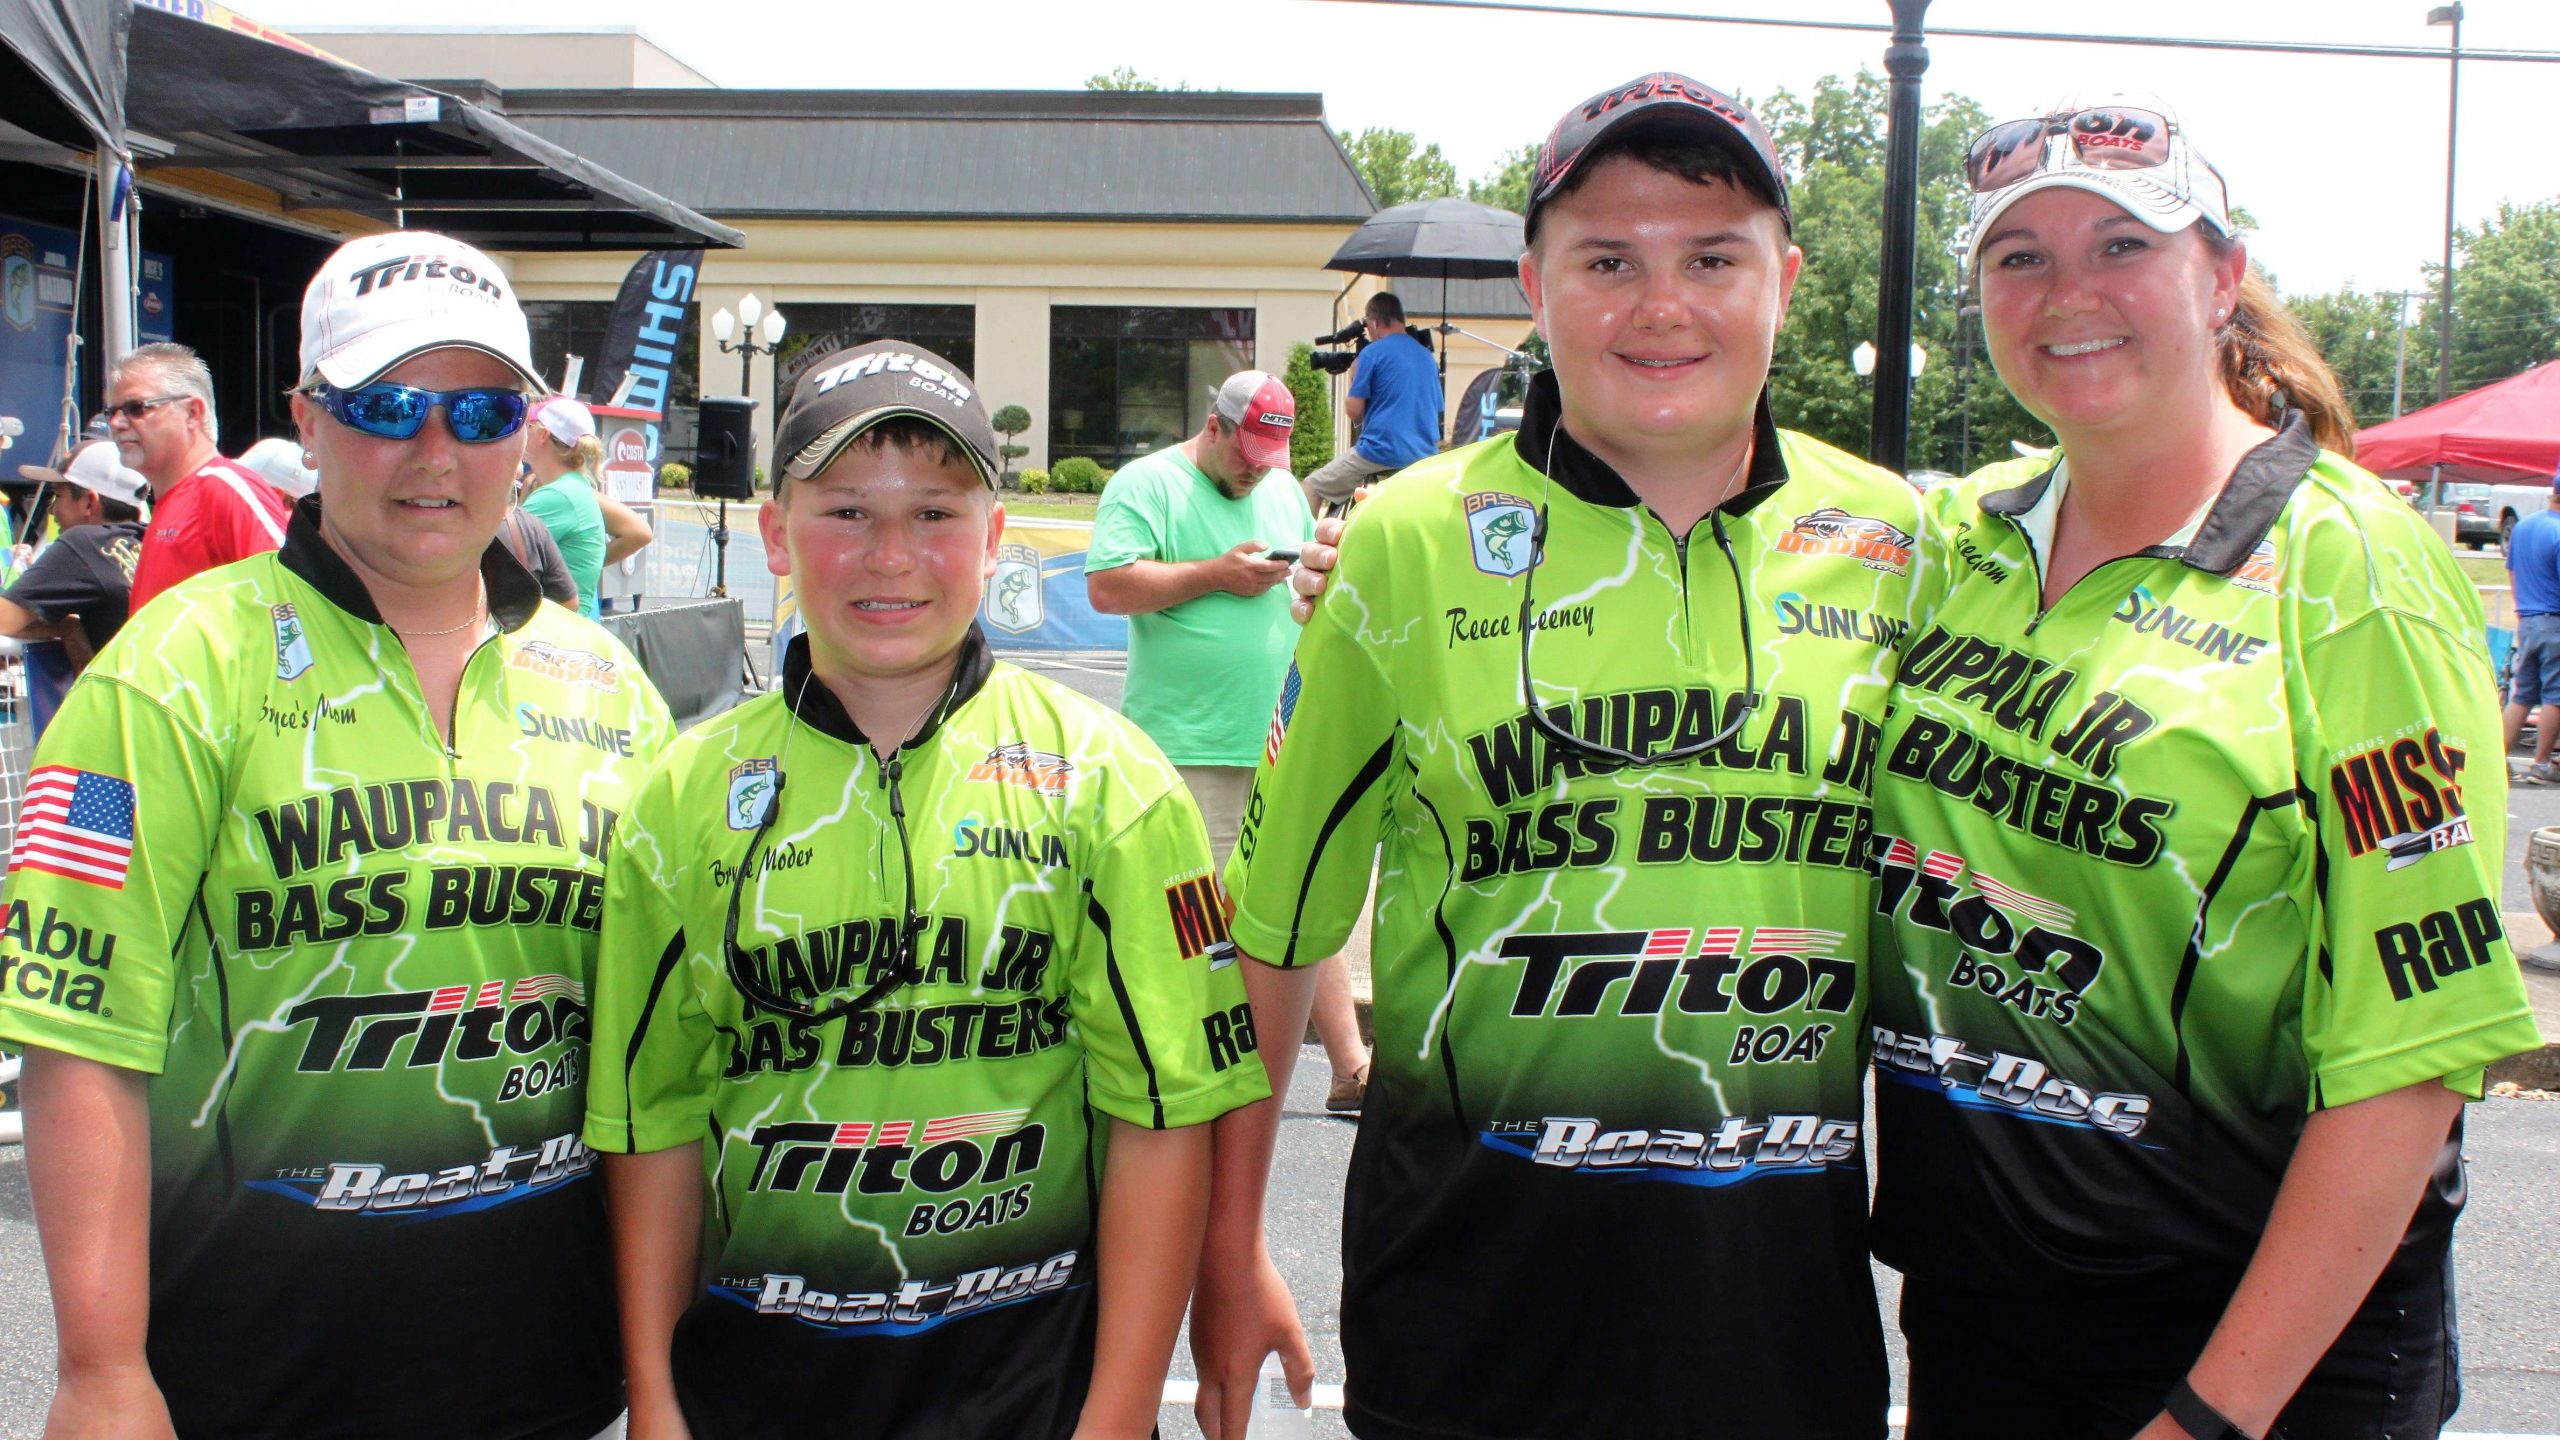  And there are the ladies with Wisconsin anglers Bryce Moder and Reese Keeney. 
